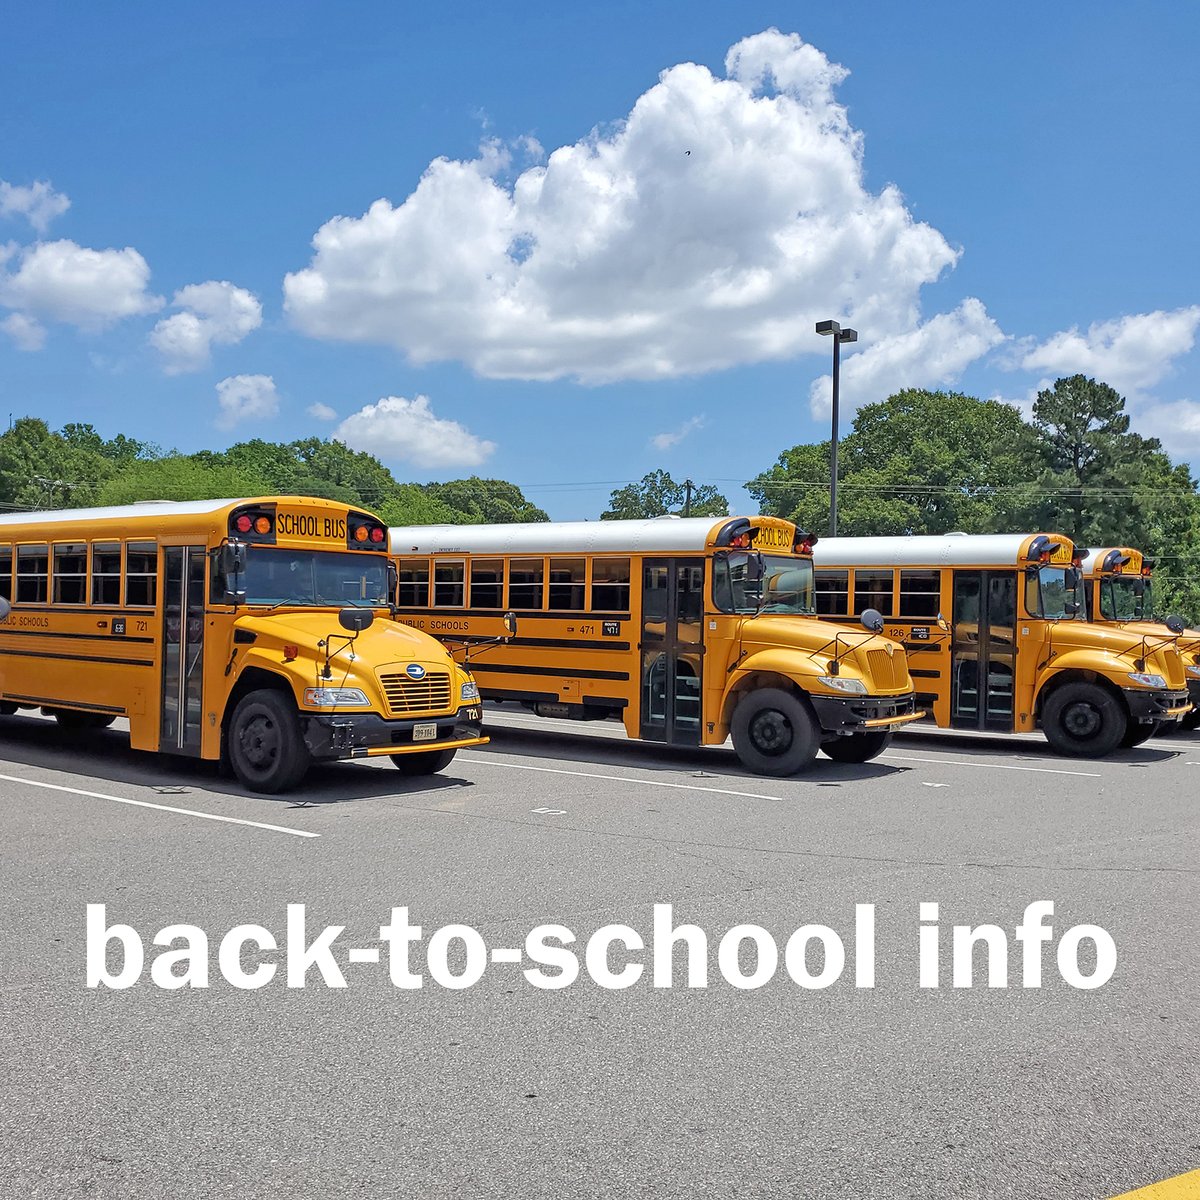 Aug. 22 is the first day of the 2022-23 school year for #oneCCPS schools that follow a traditional calendar. But some students will not start until Aug. 23/24. Get details at bit.ly/CCPScals so you know which date your child heads to class. Questions? Contact your school.